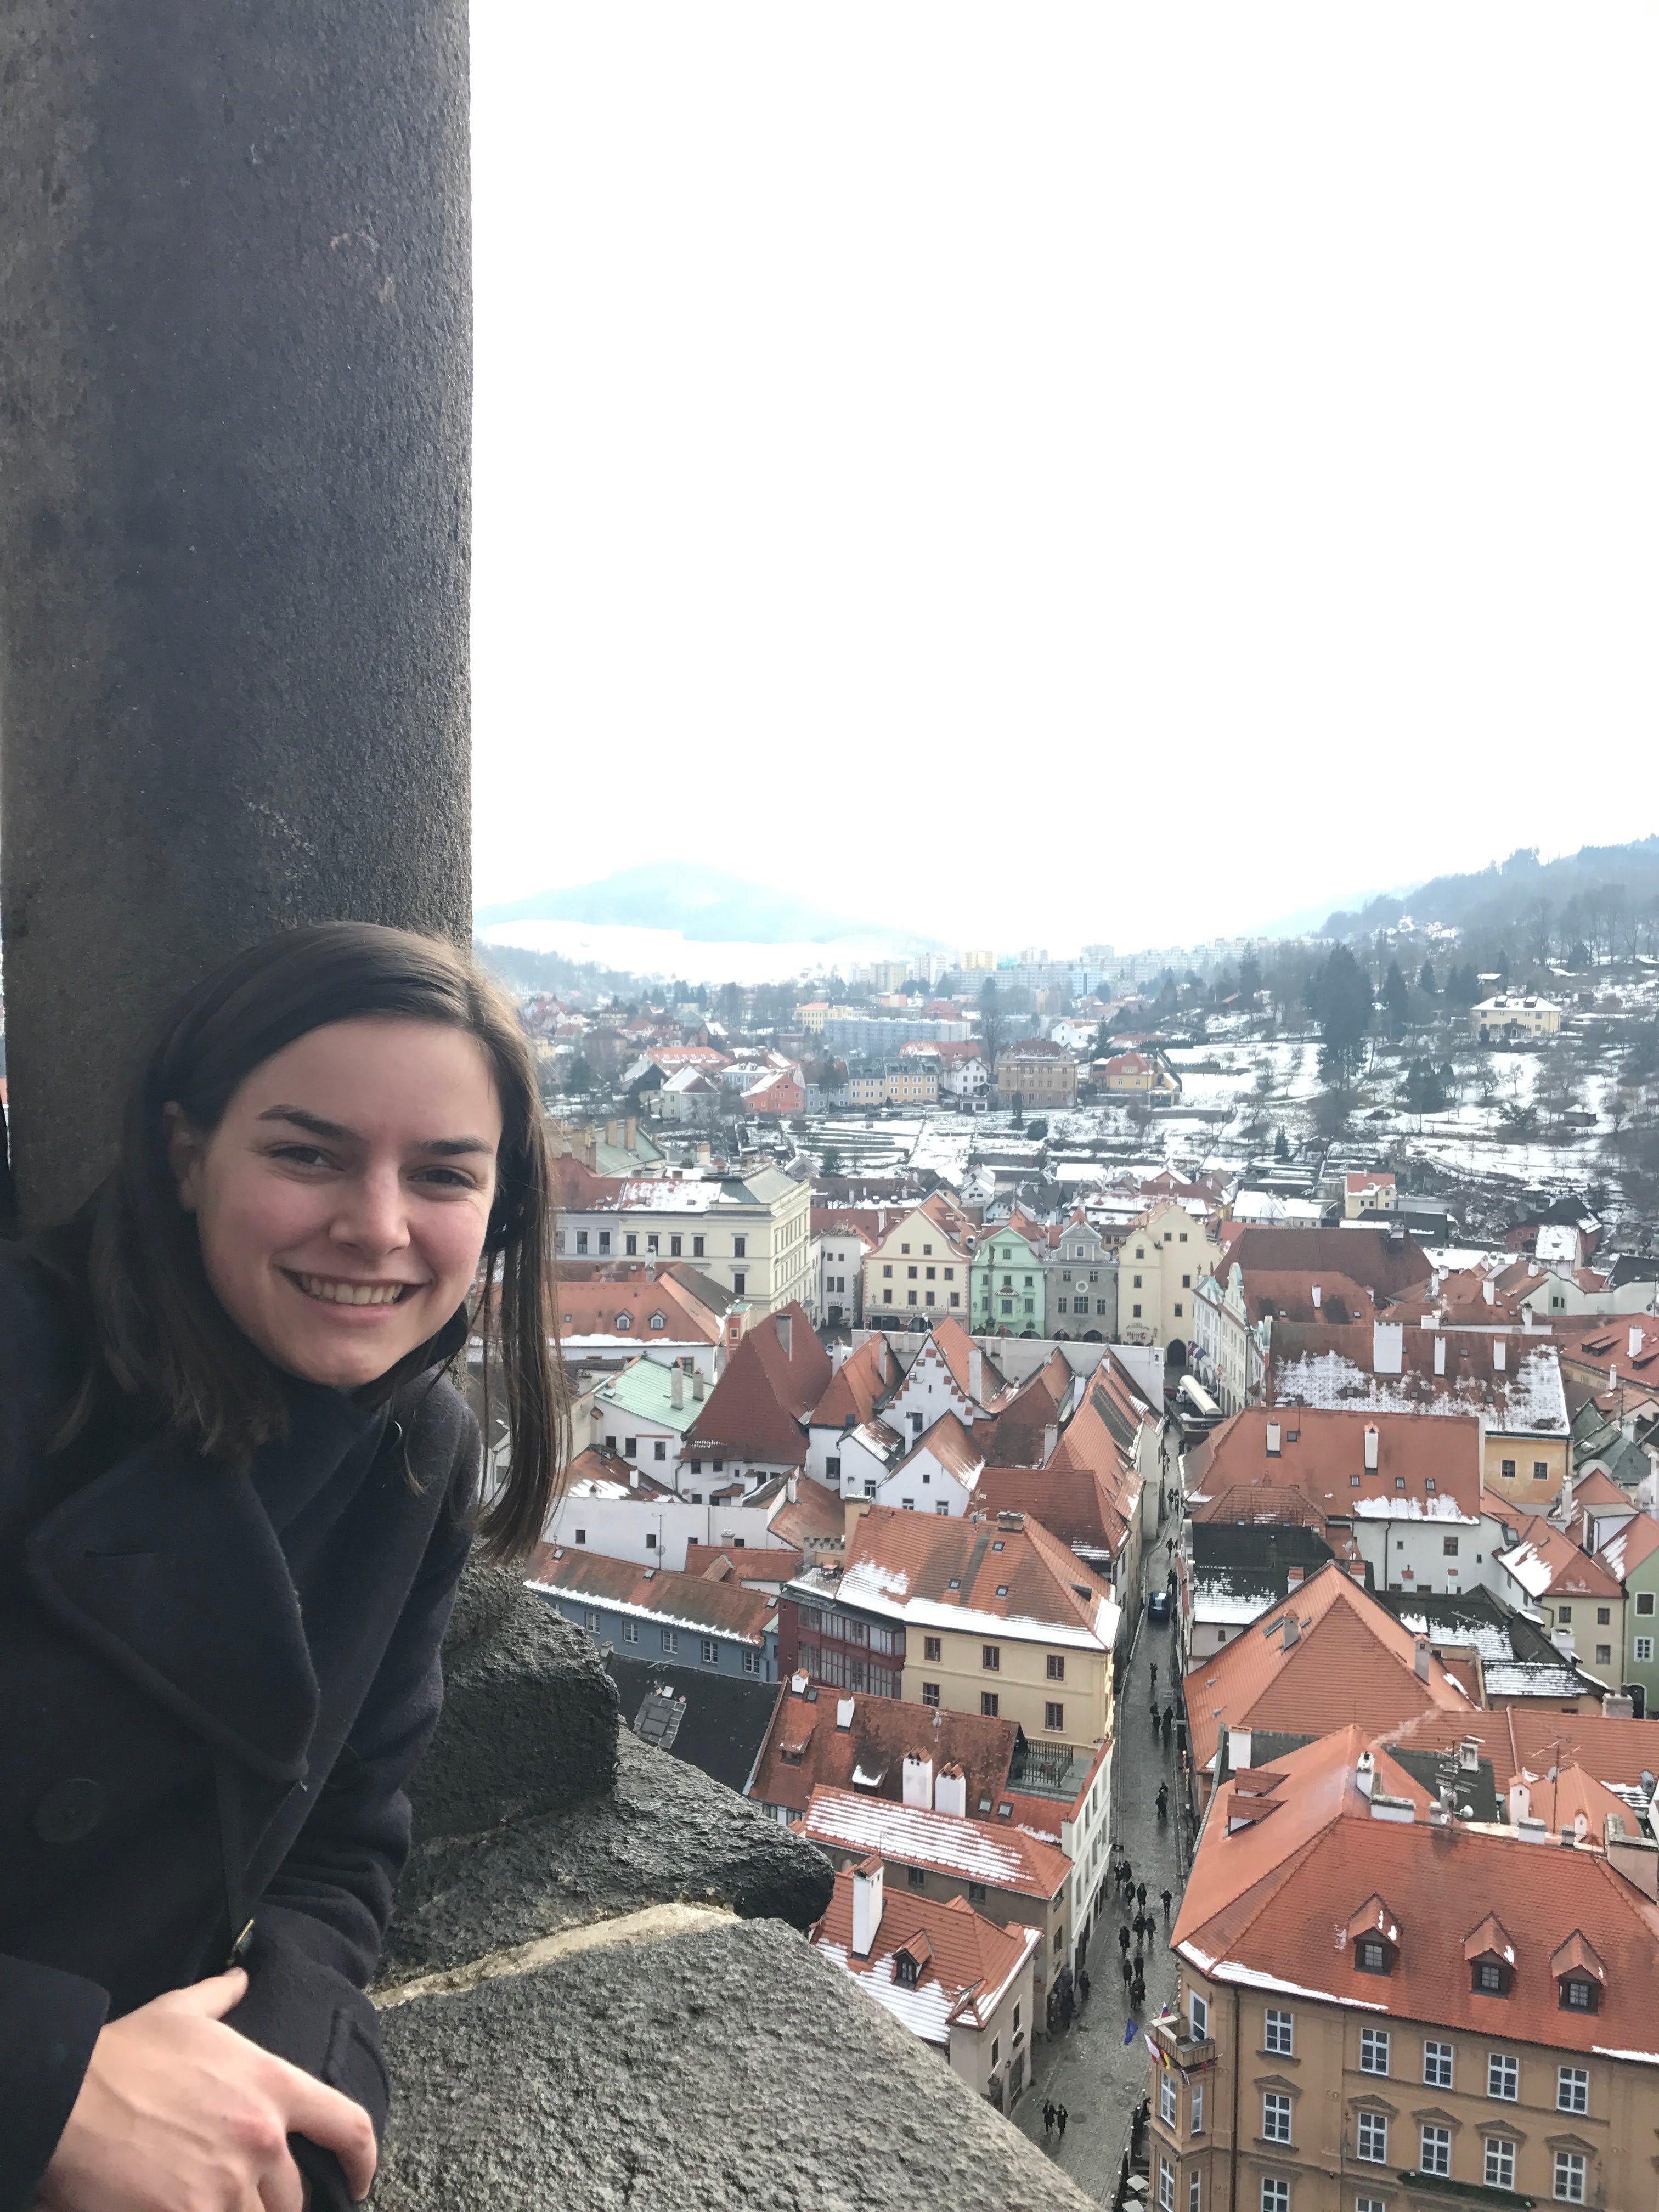 Margot poses for a photo at a vantage point over looking Czechia 